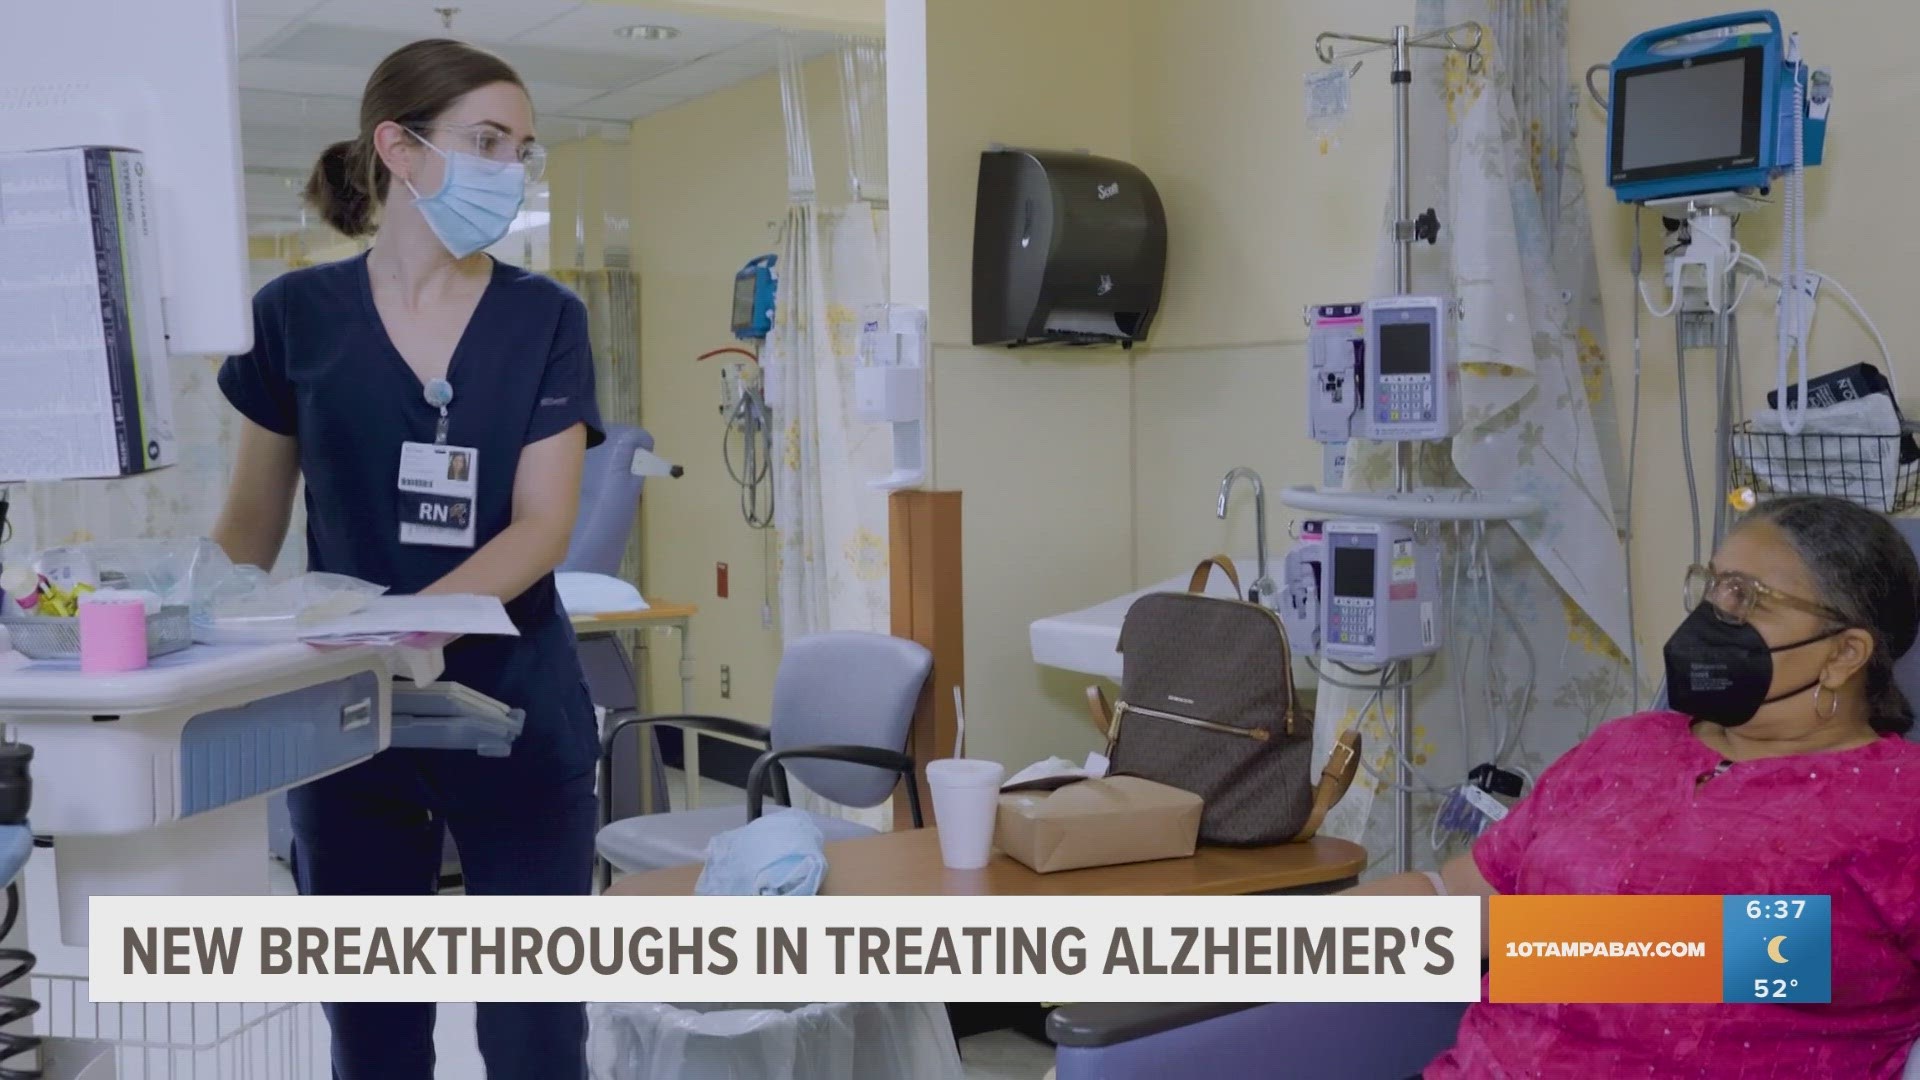 Researchers say they need more African American participants since Alzheimer's is more prevalent in that community.